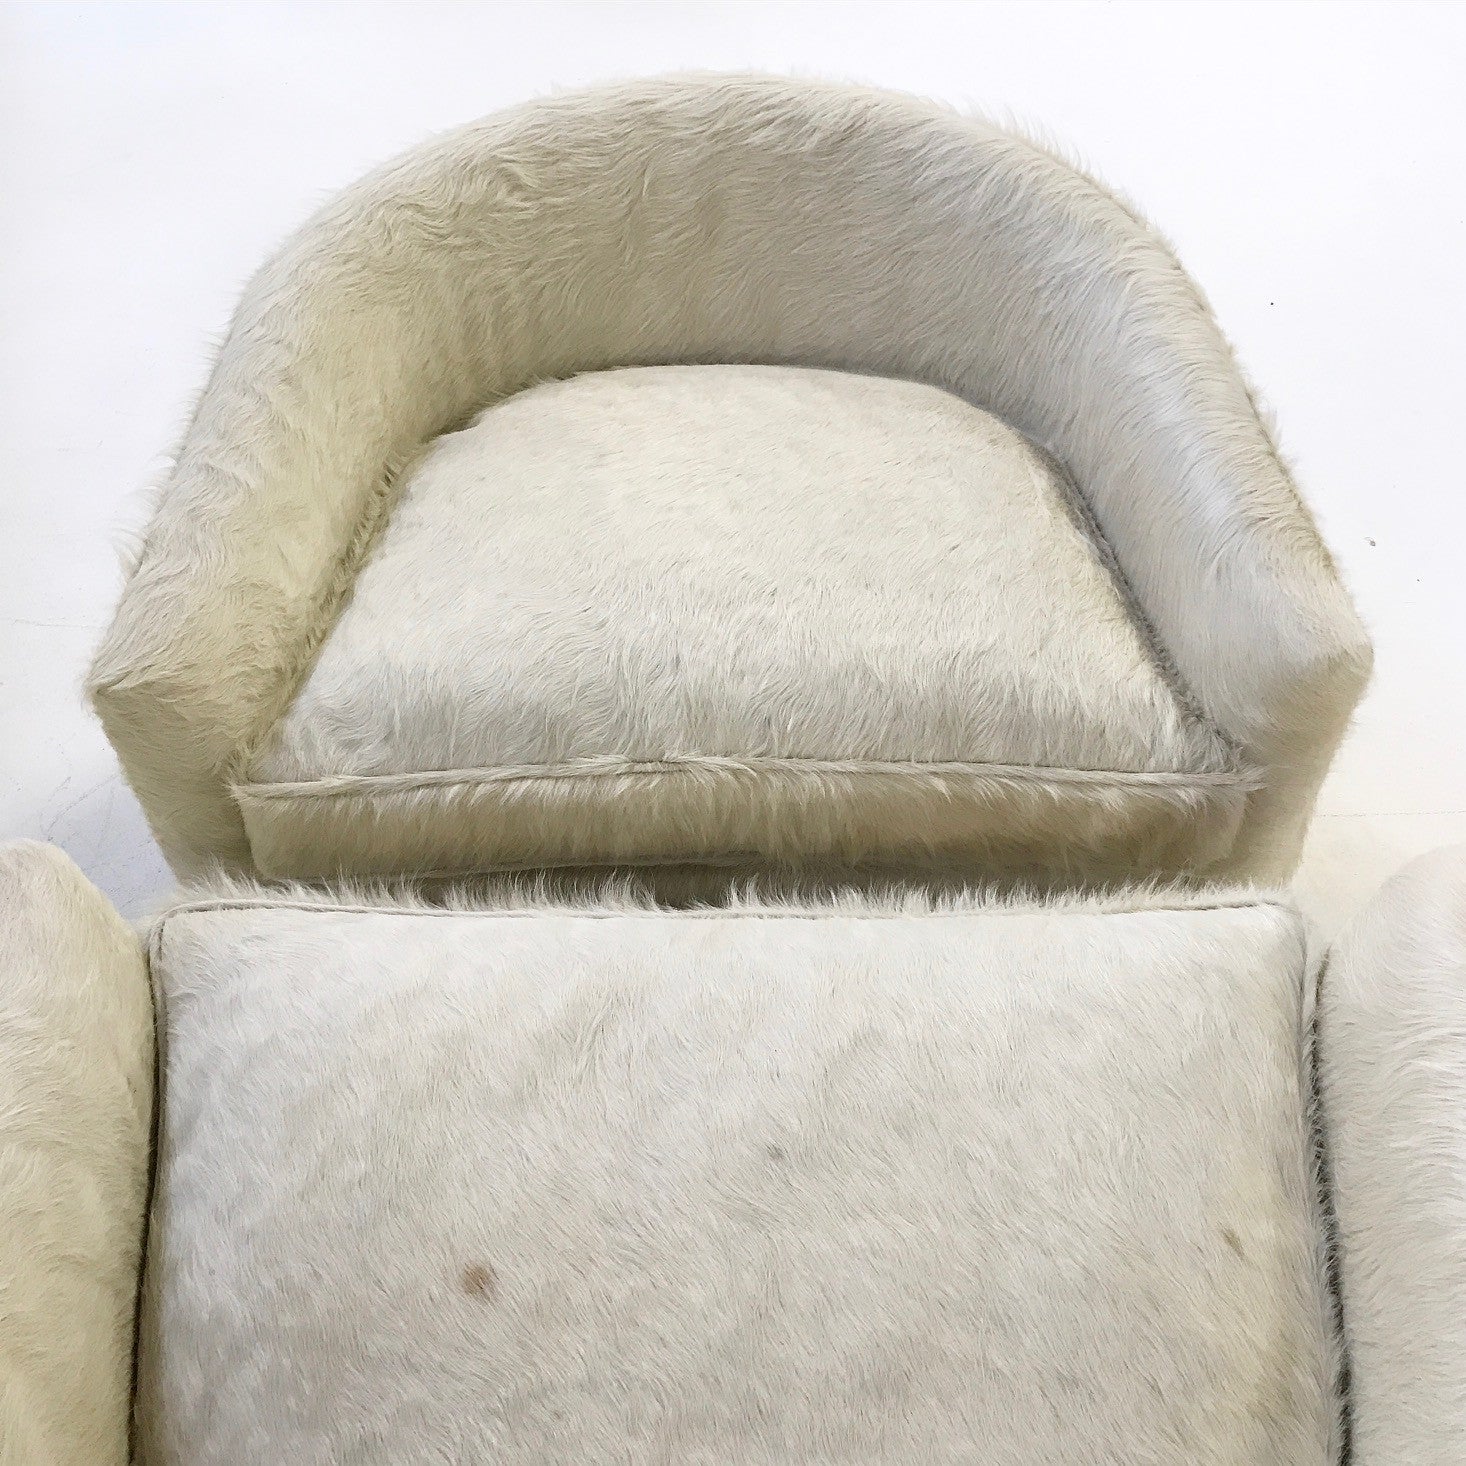 Cloud Chairs in Brazilian Cowhide, pair - FORSYTH